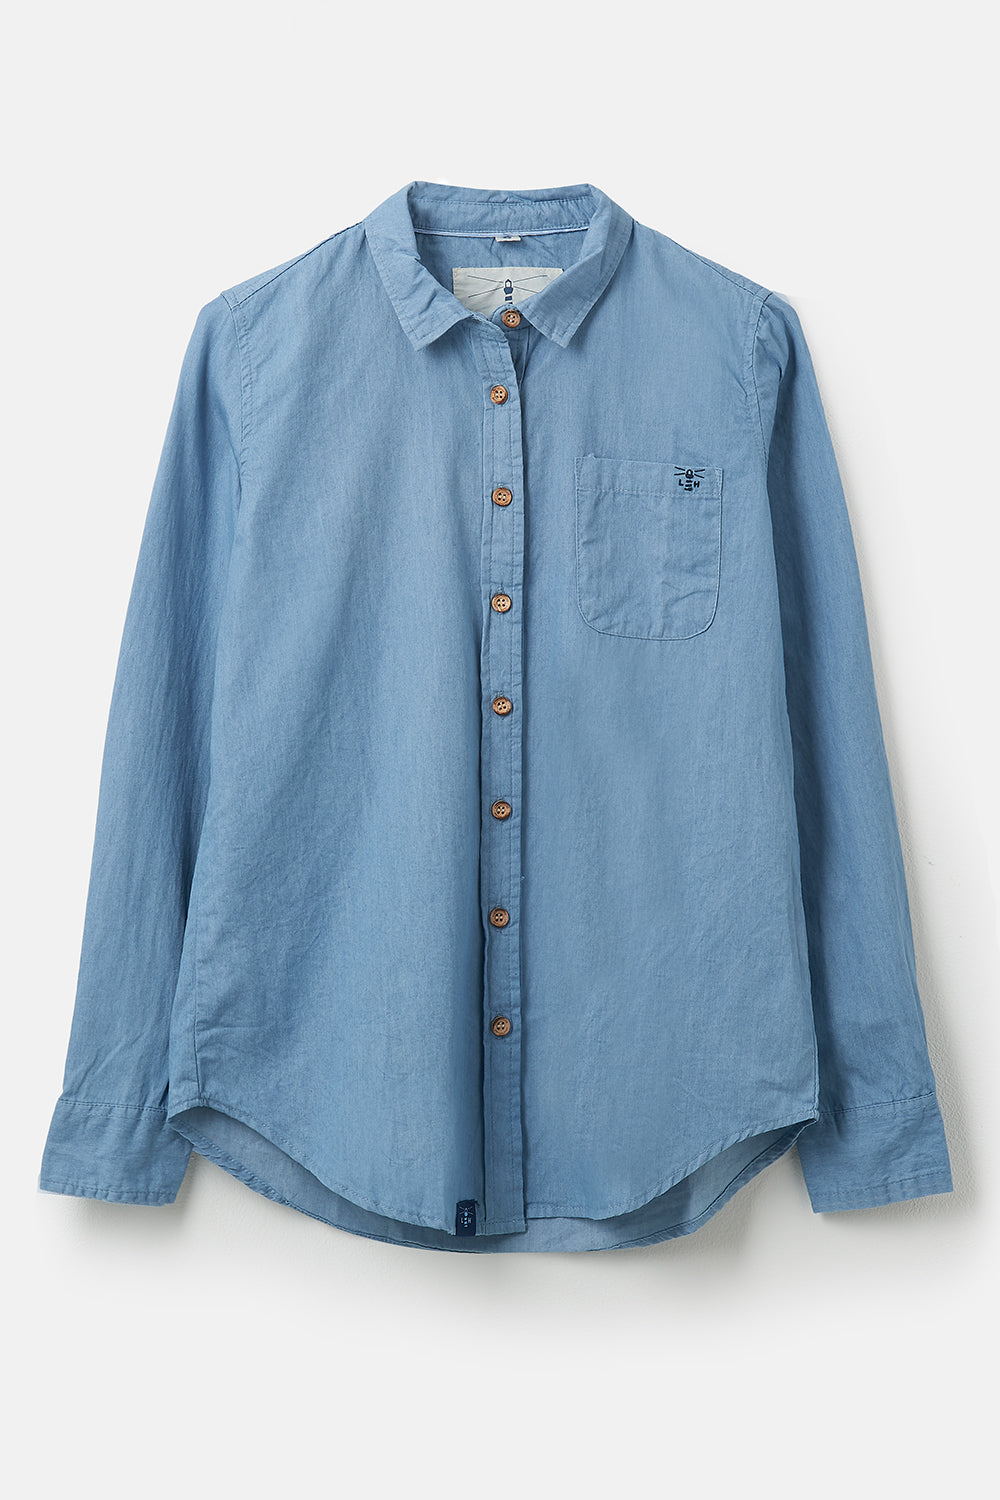 blue button up blouse womens for Sale,Up To OFF 68%